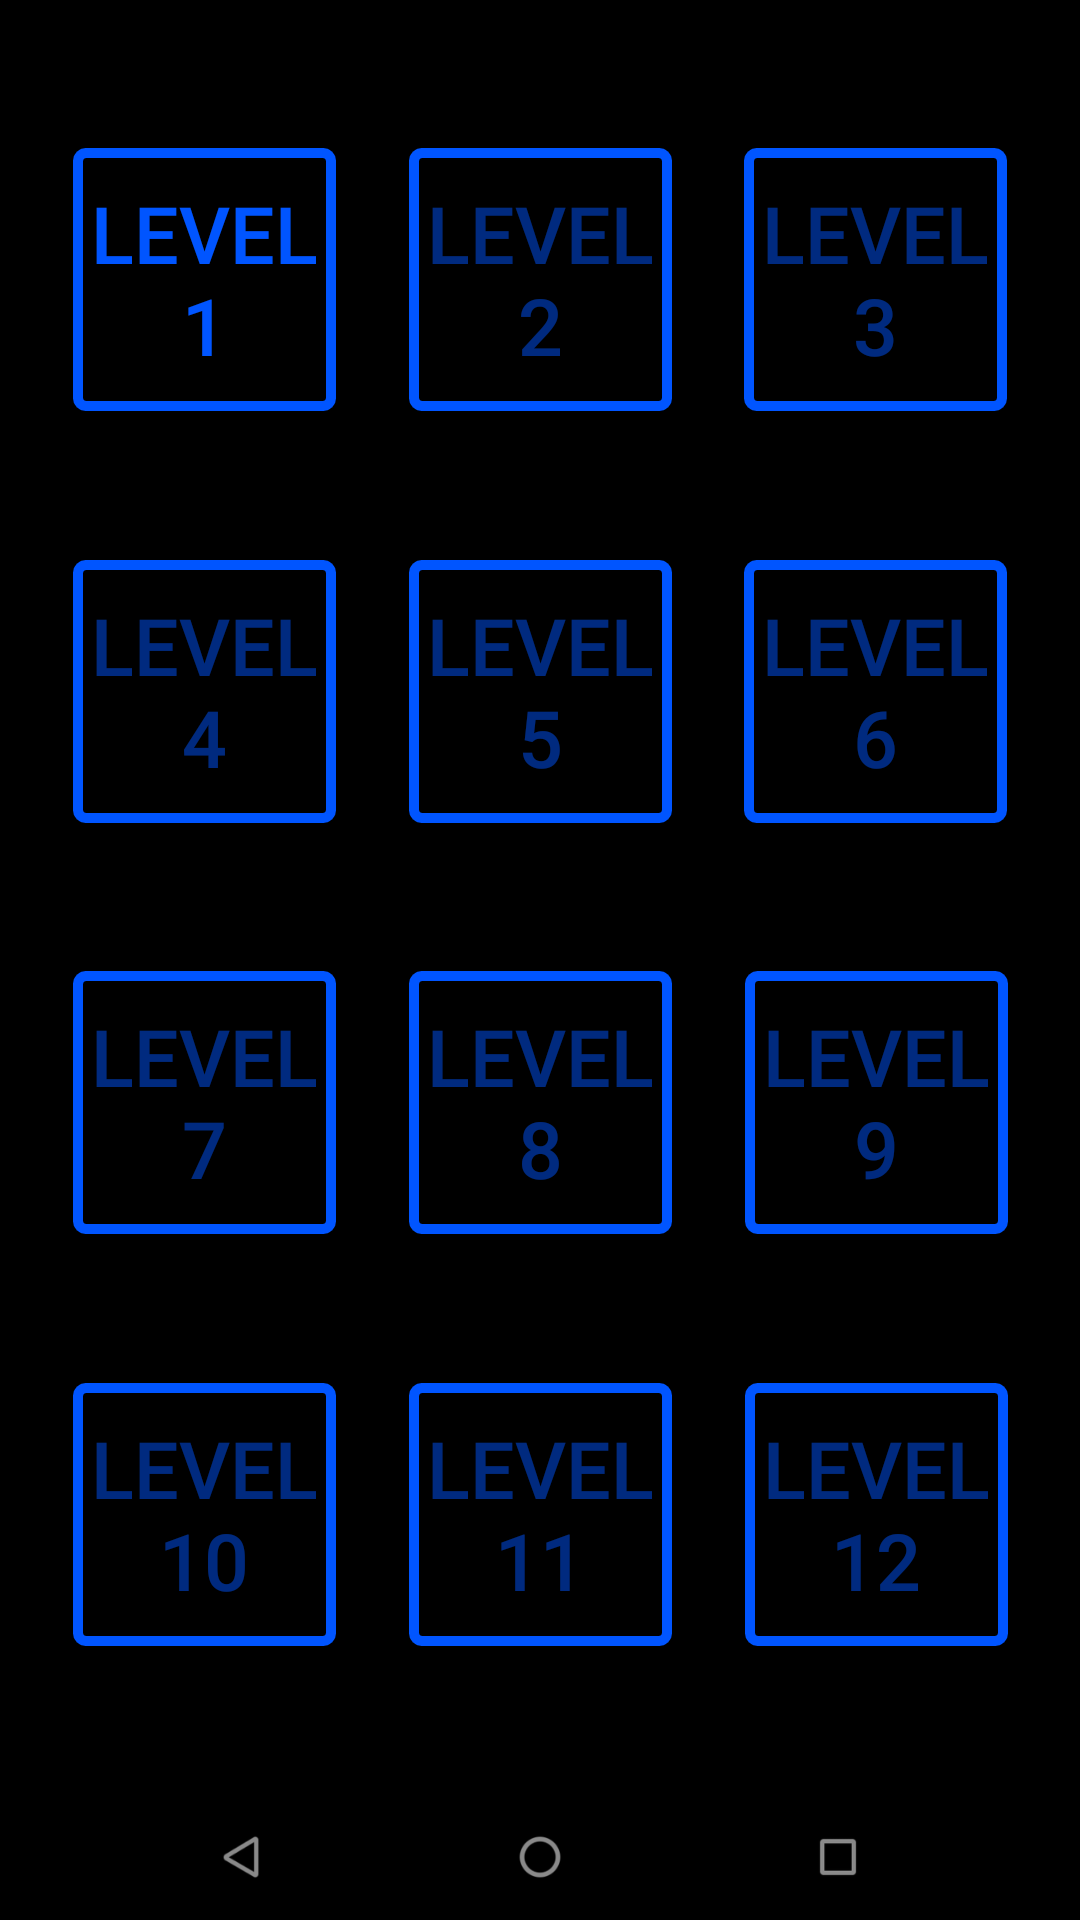 Figure 3 The level selection screen when first opening the app.